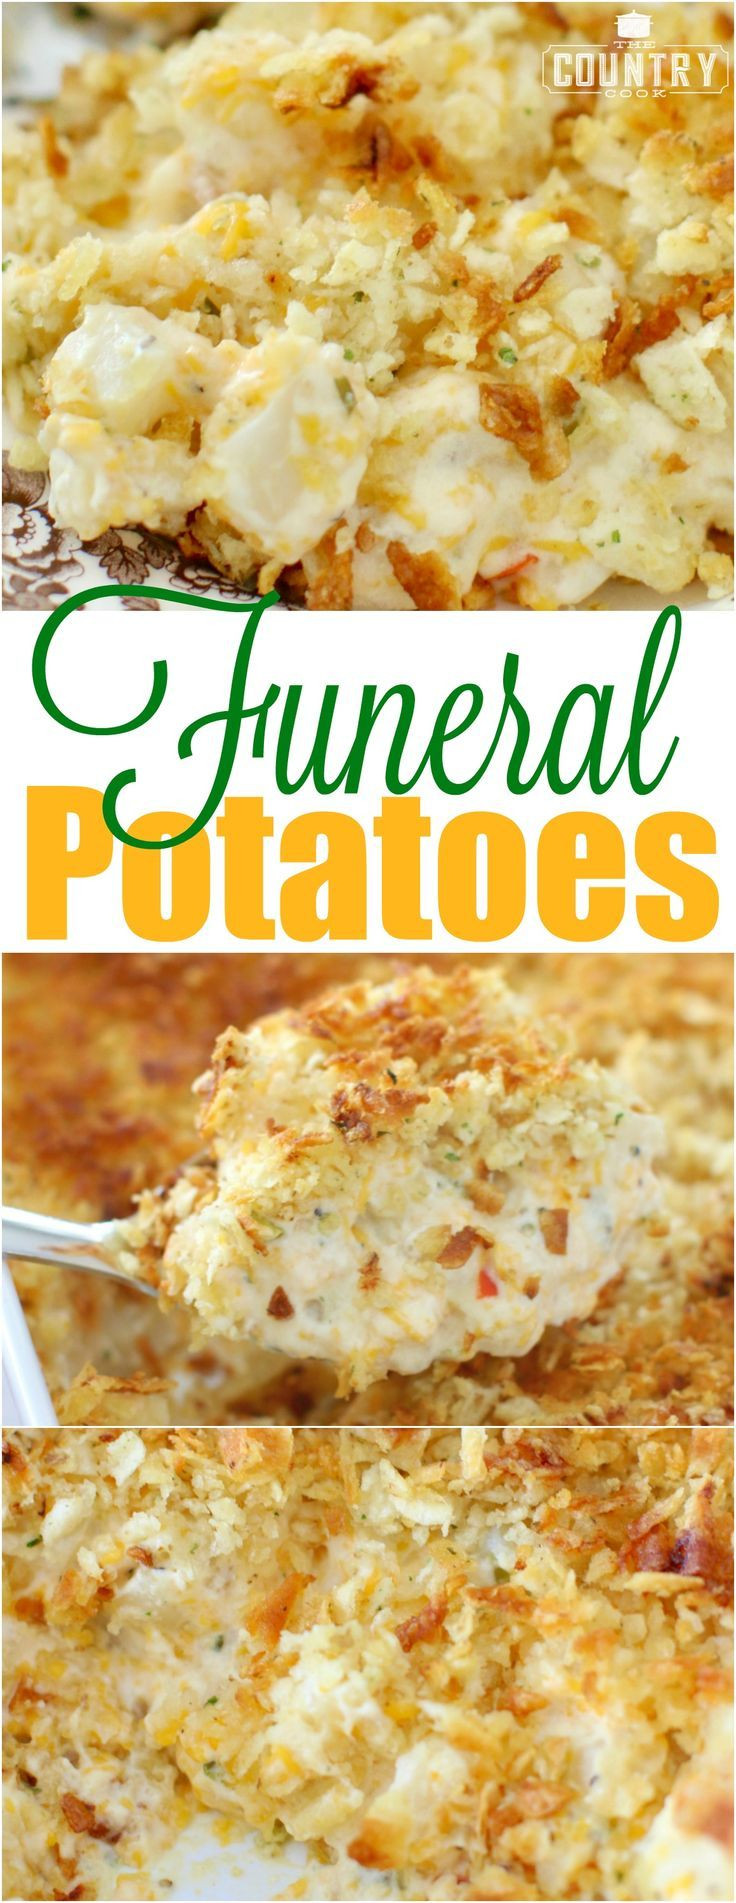 Thanksgiving Potluck Side Dishes
 25 best ideas about Potluck side dishes on Pinterest